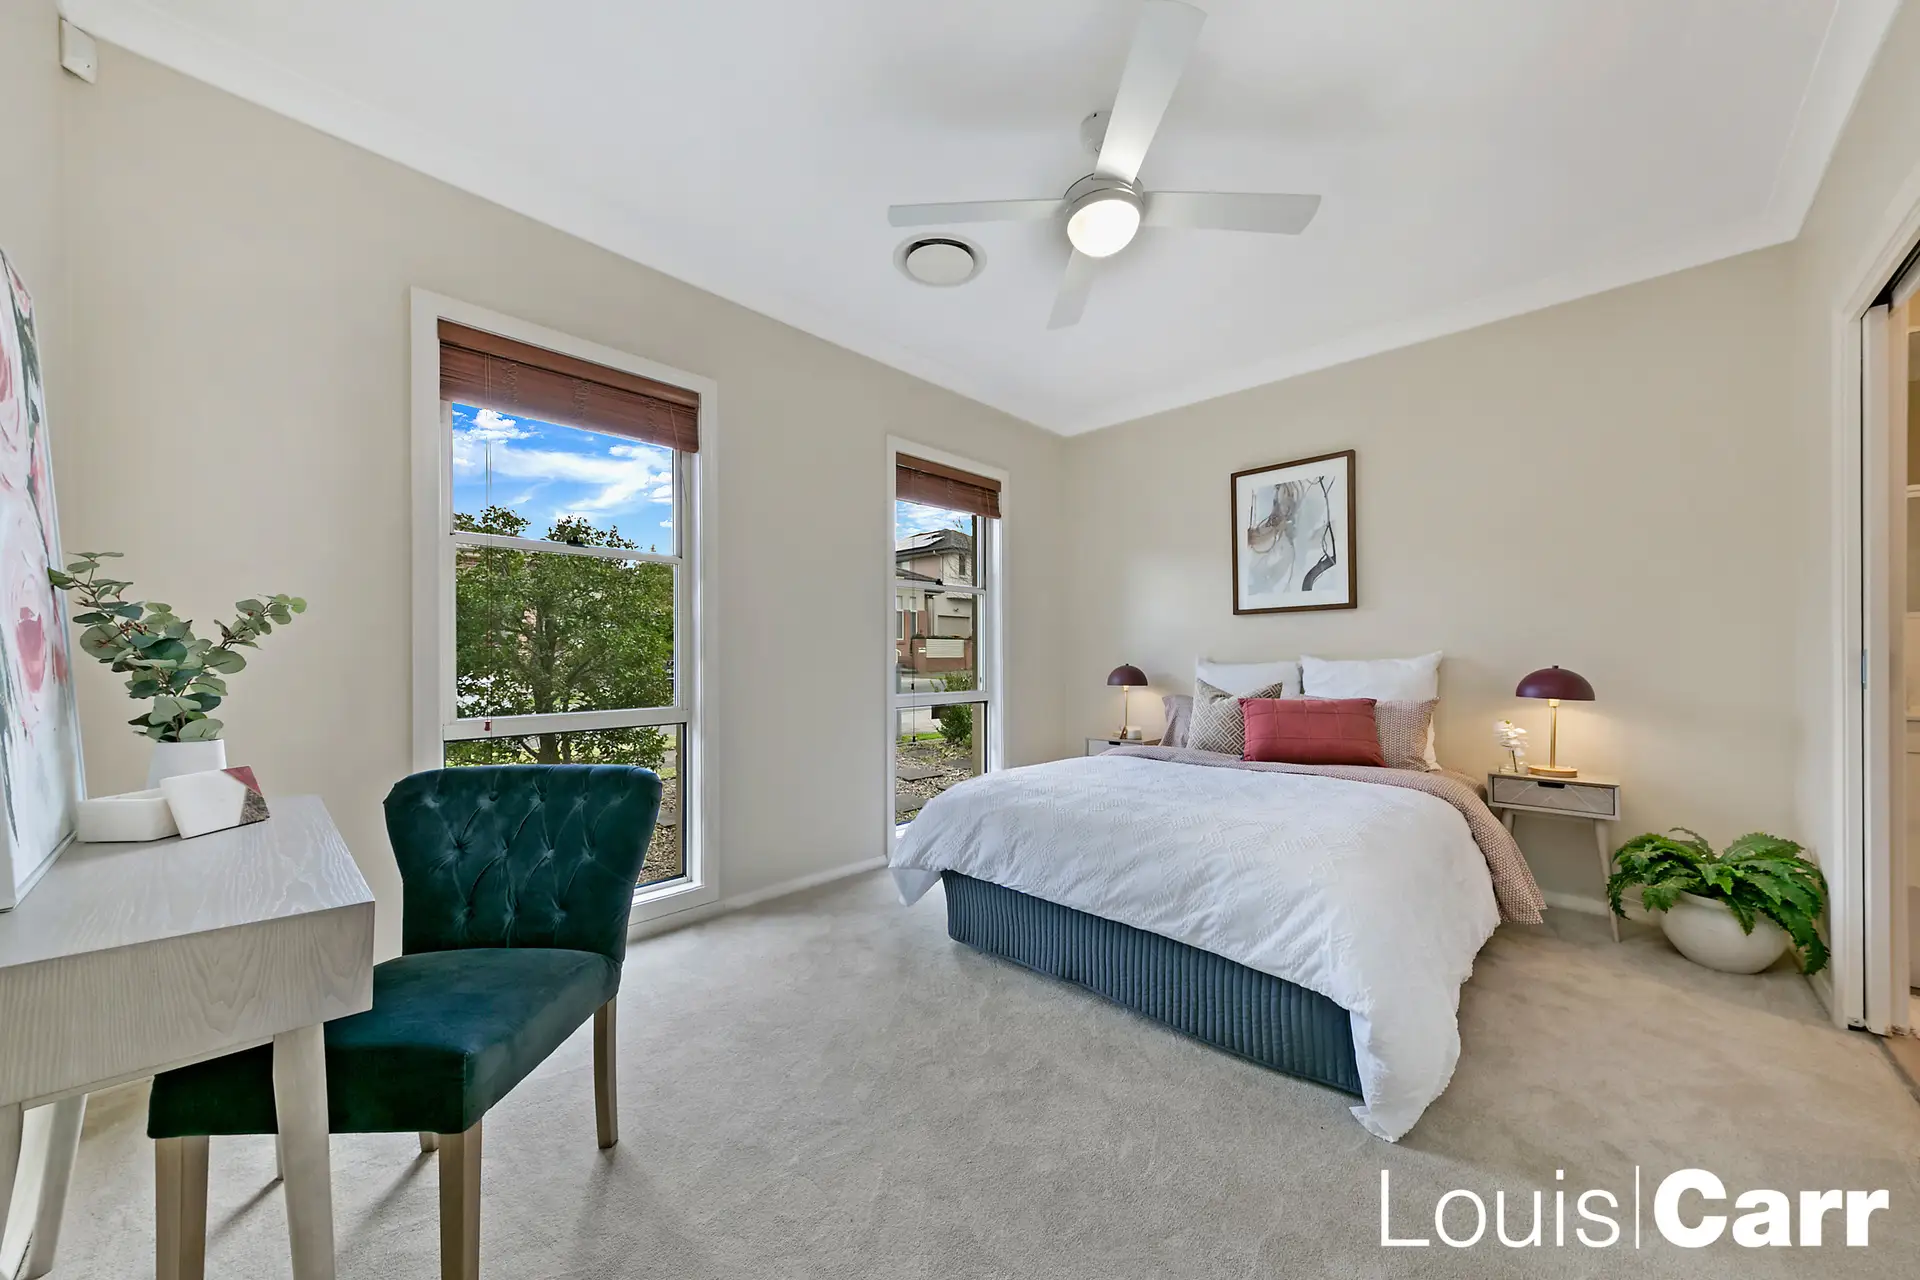 Photo #6: 7 Holly Street, Rouse Hill - Sold by Louis Carr Real Estate